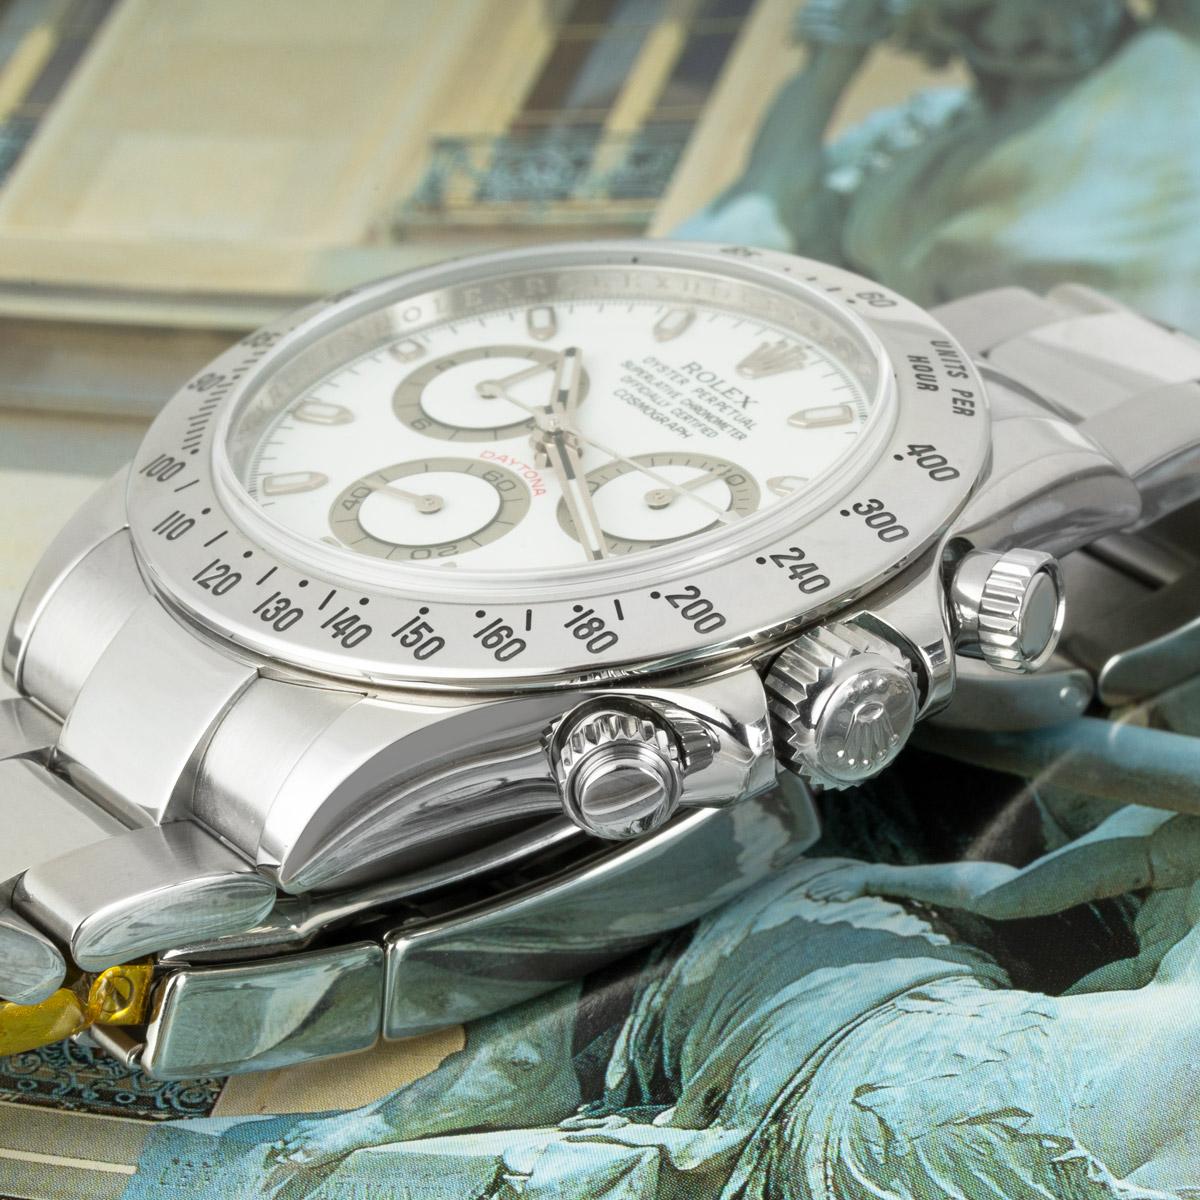 A Daytona in Oystersteel by Rolex, featuring a unique APH error white dial. With an engraved tachymetric scale, three counters and pushers; the Daytona was designed to be the ultimate timing tool for endurance racing drivers.

The Oyster bracelet is